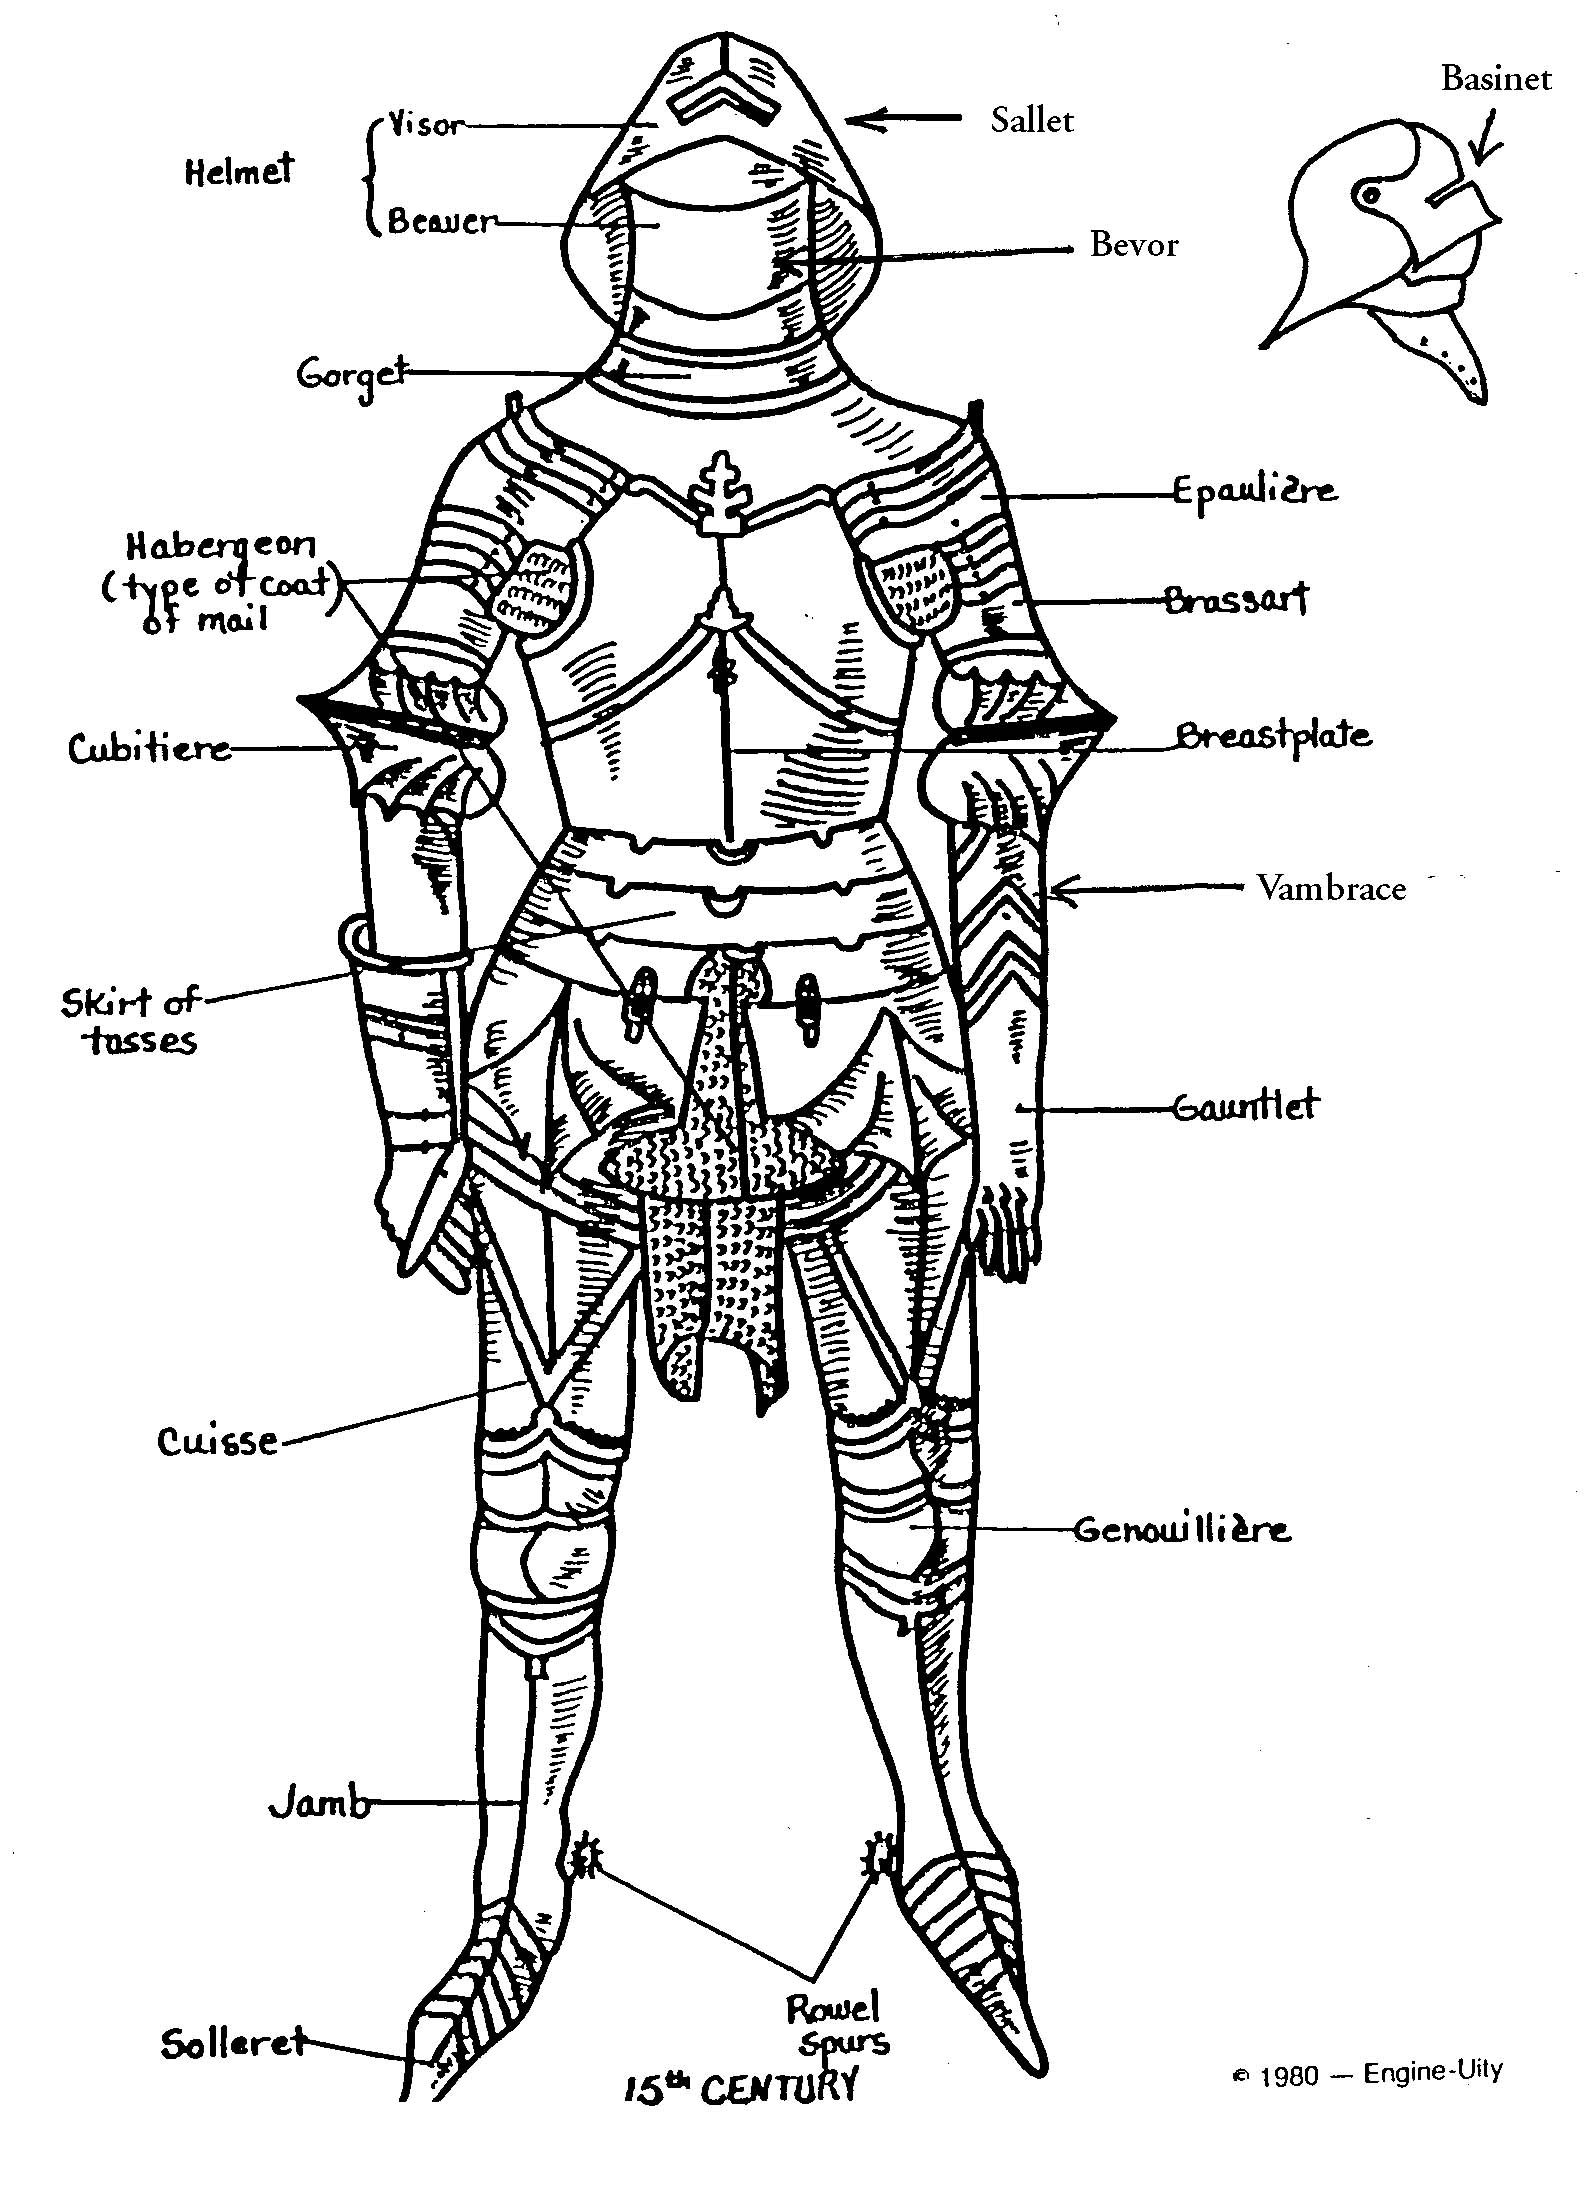 Medieval Armor and Weapons in the Later Middle Ages